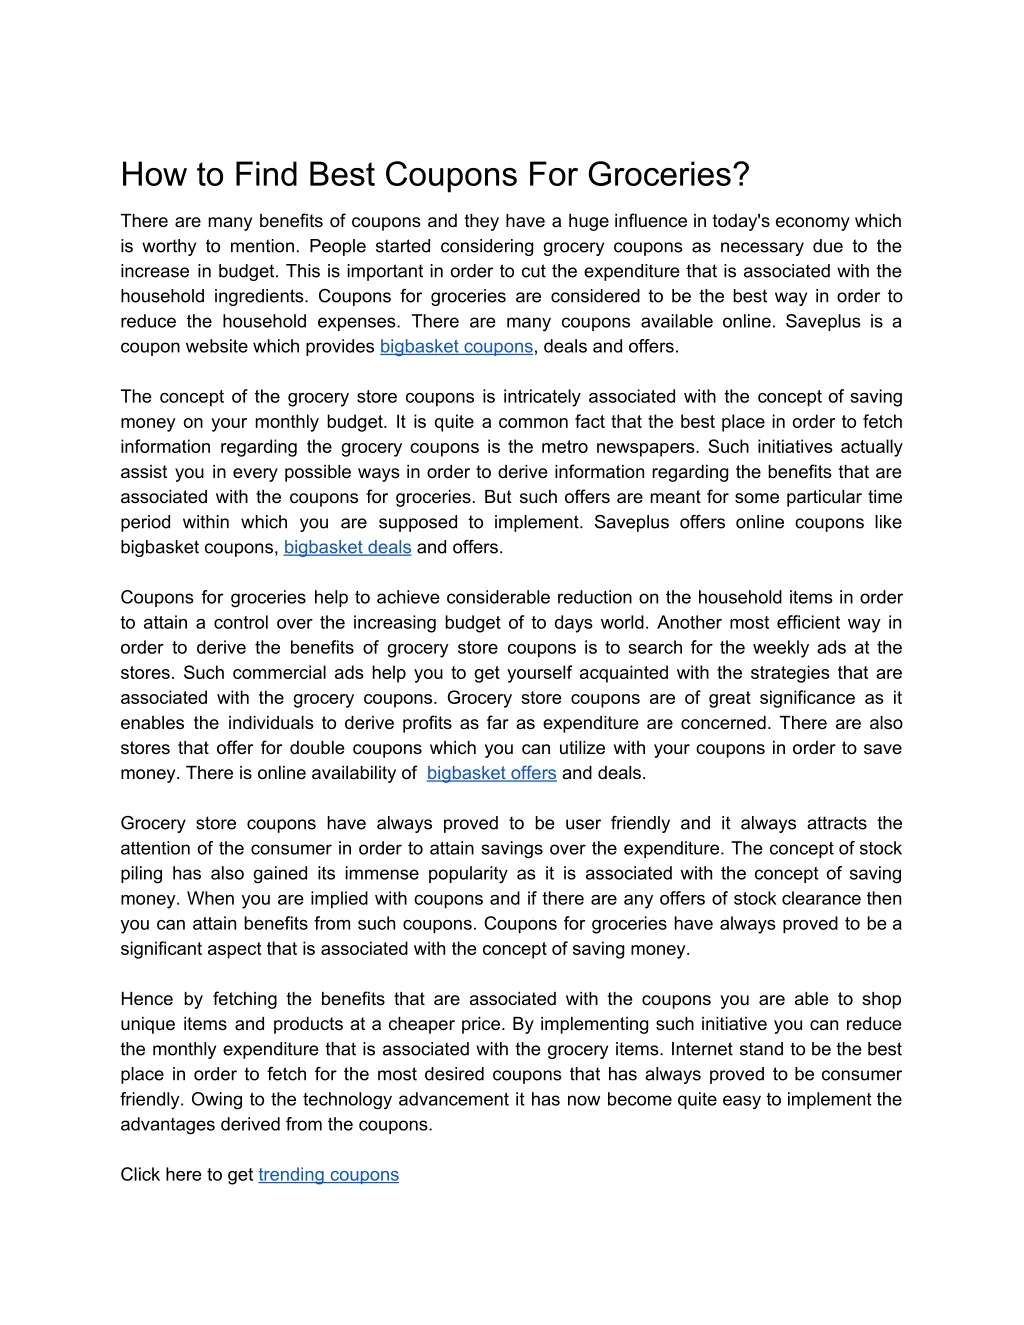 how to find best coupons for groceries